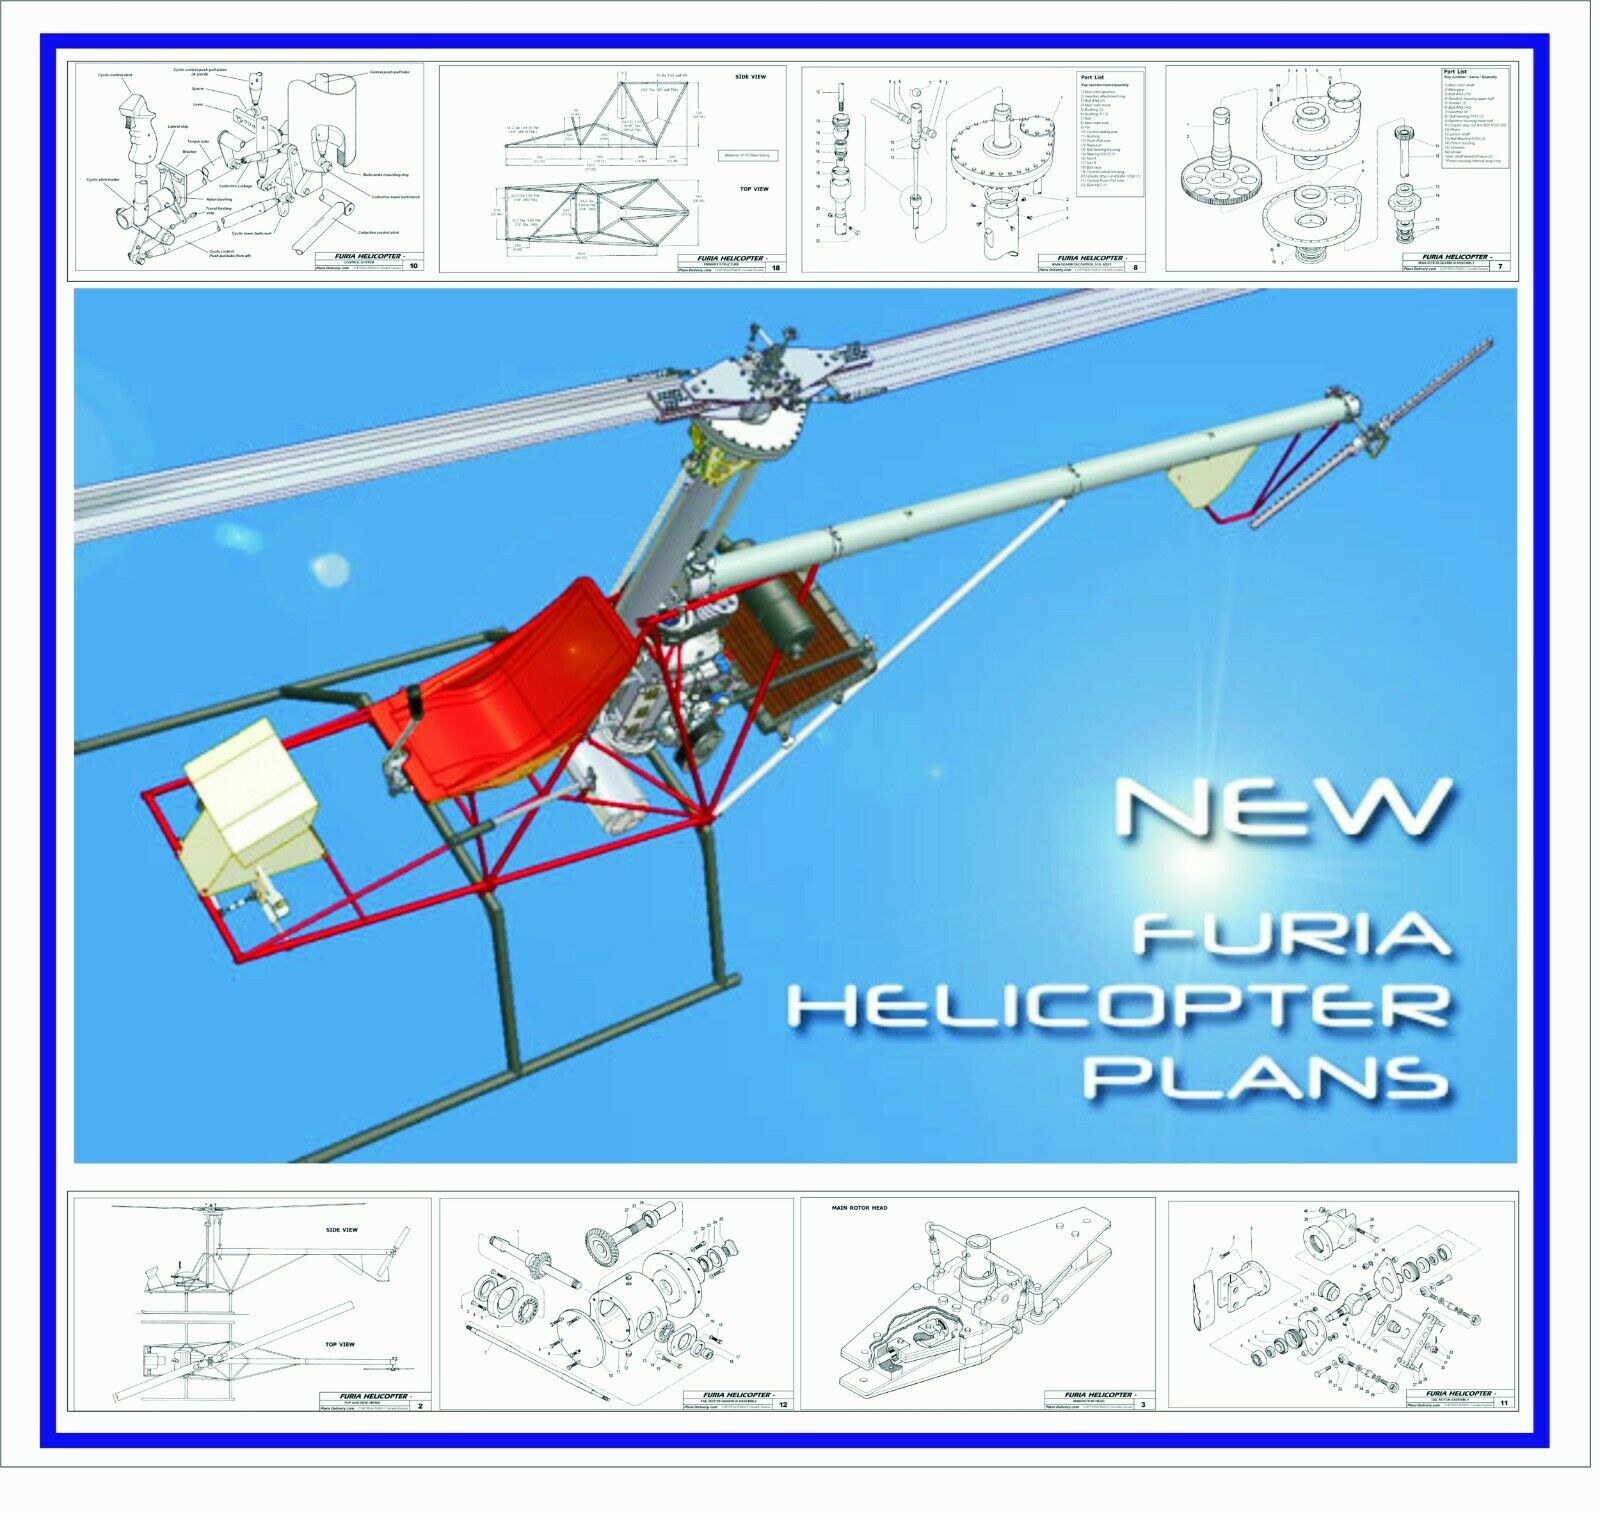 Helicopter Furia. Plane